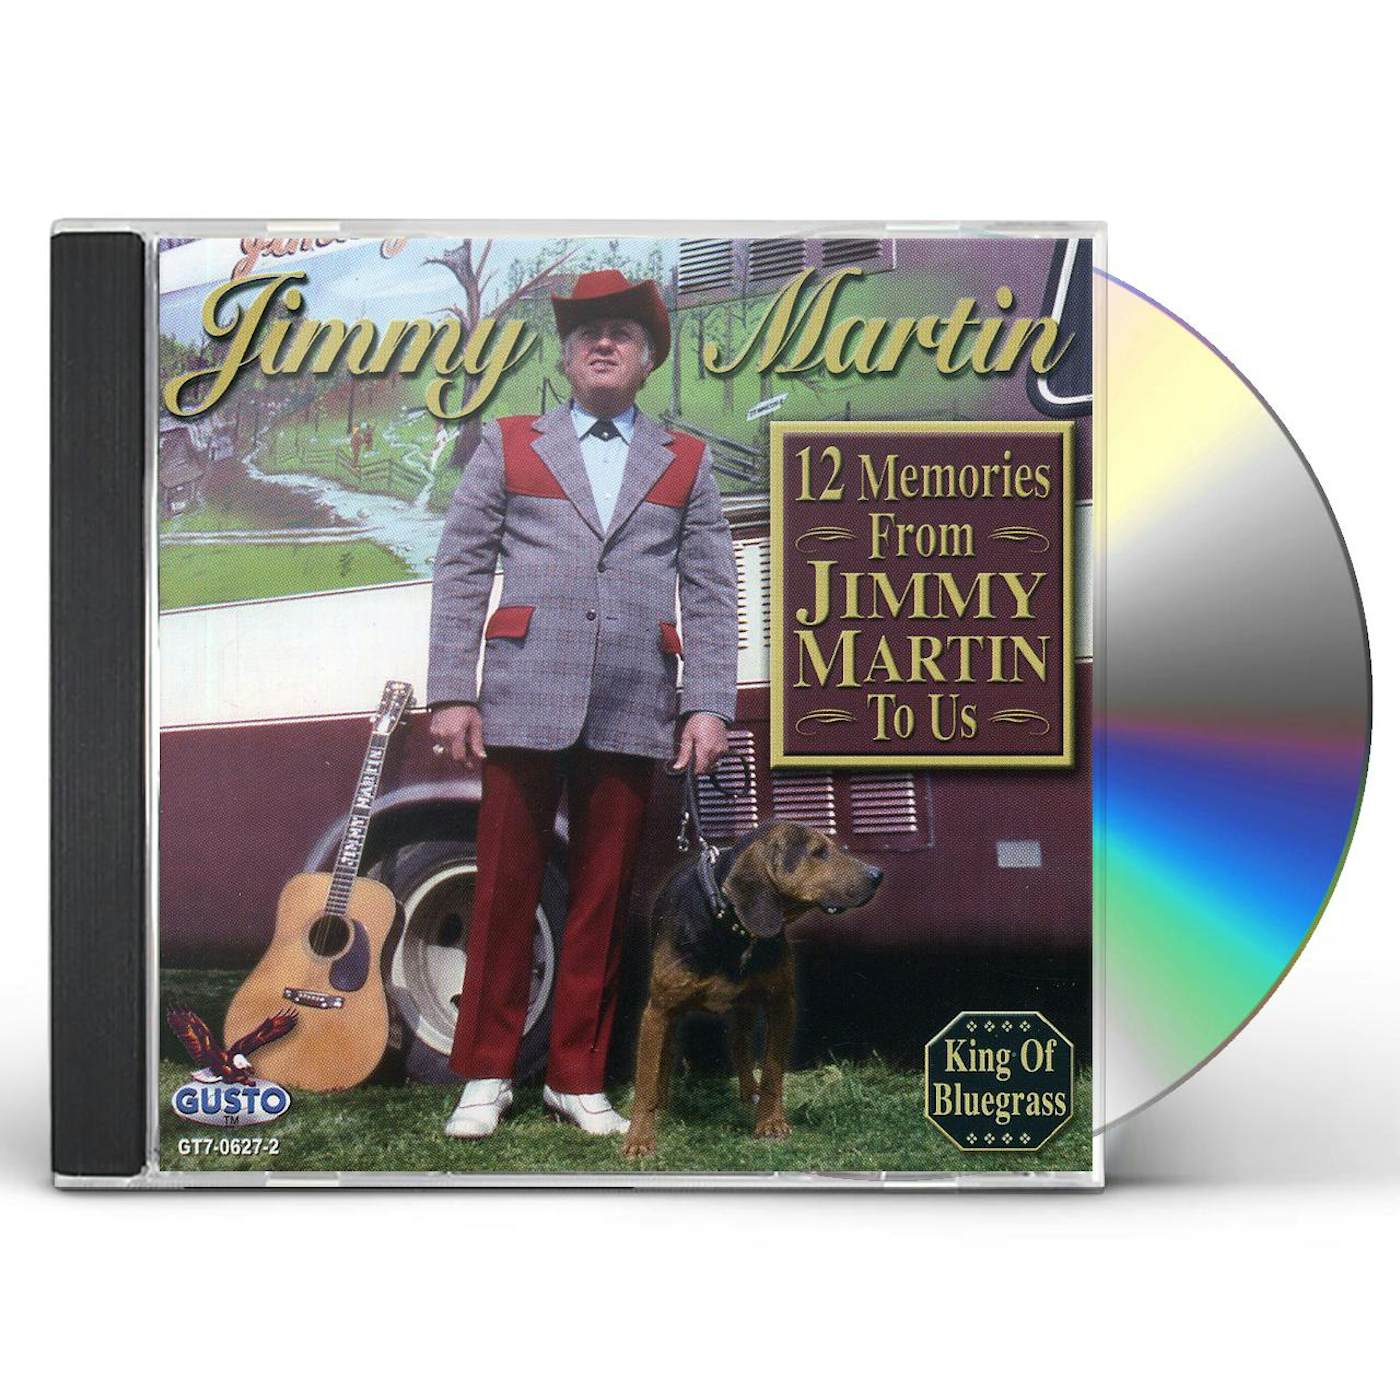 12 MEMORIES FROM JIMMY MARTIN TO US CD